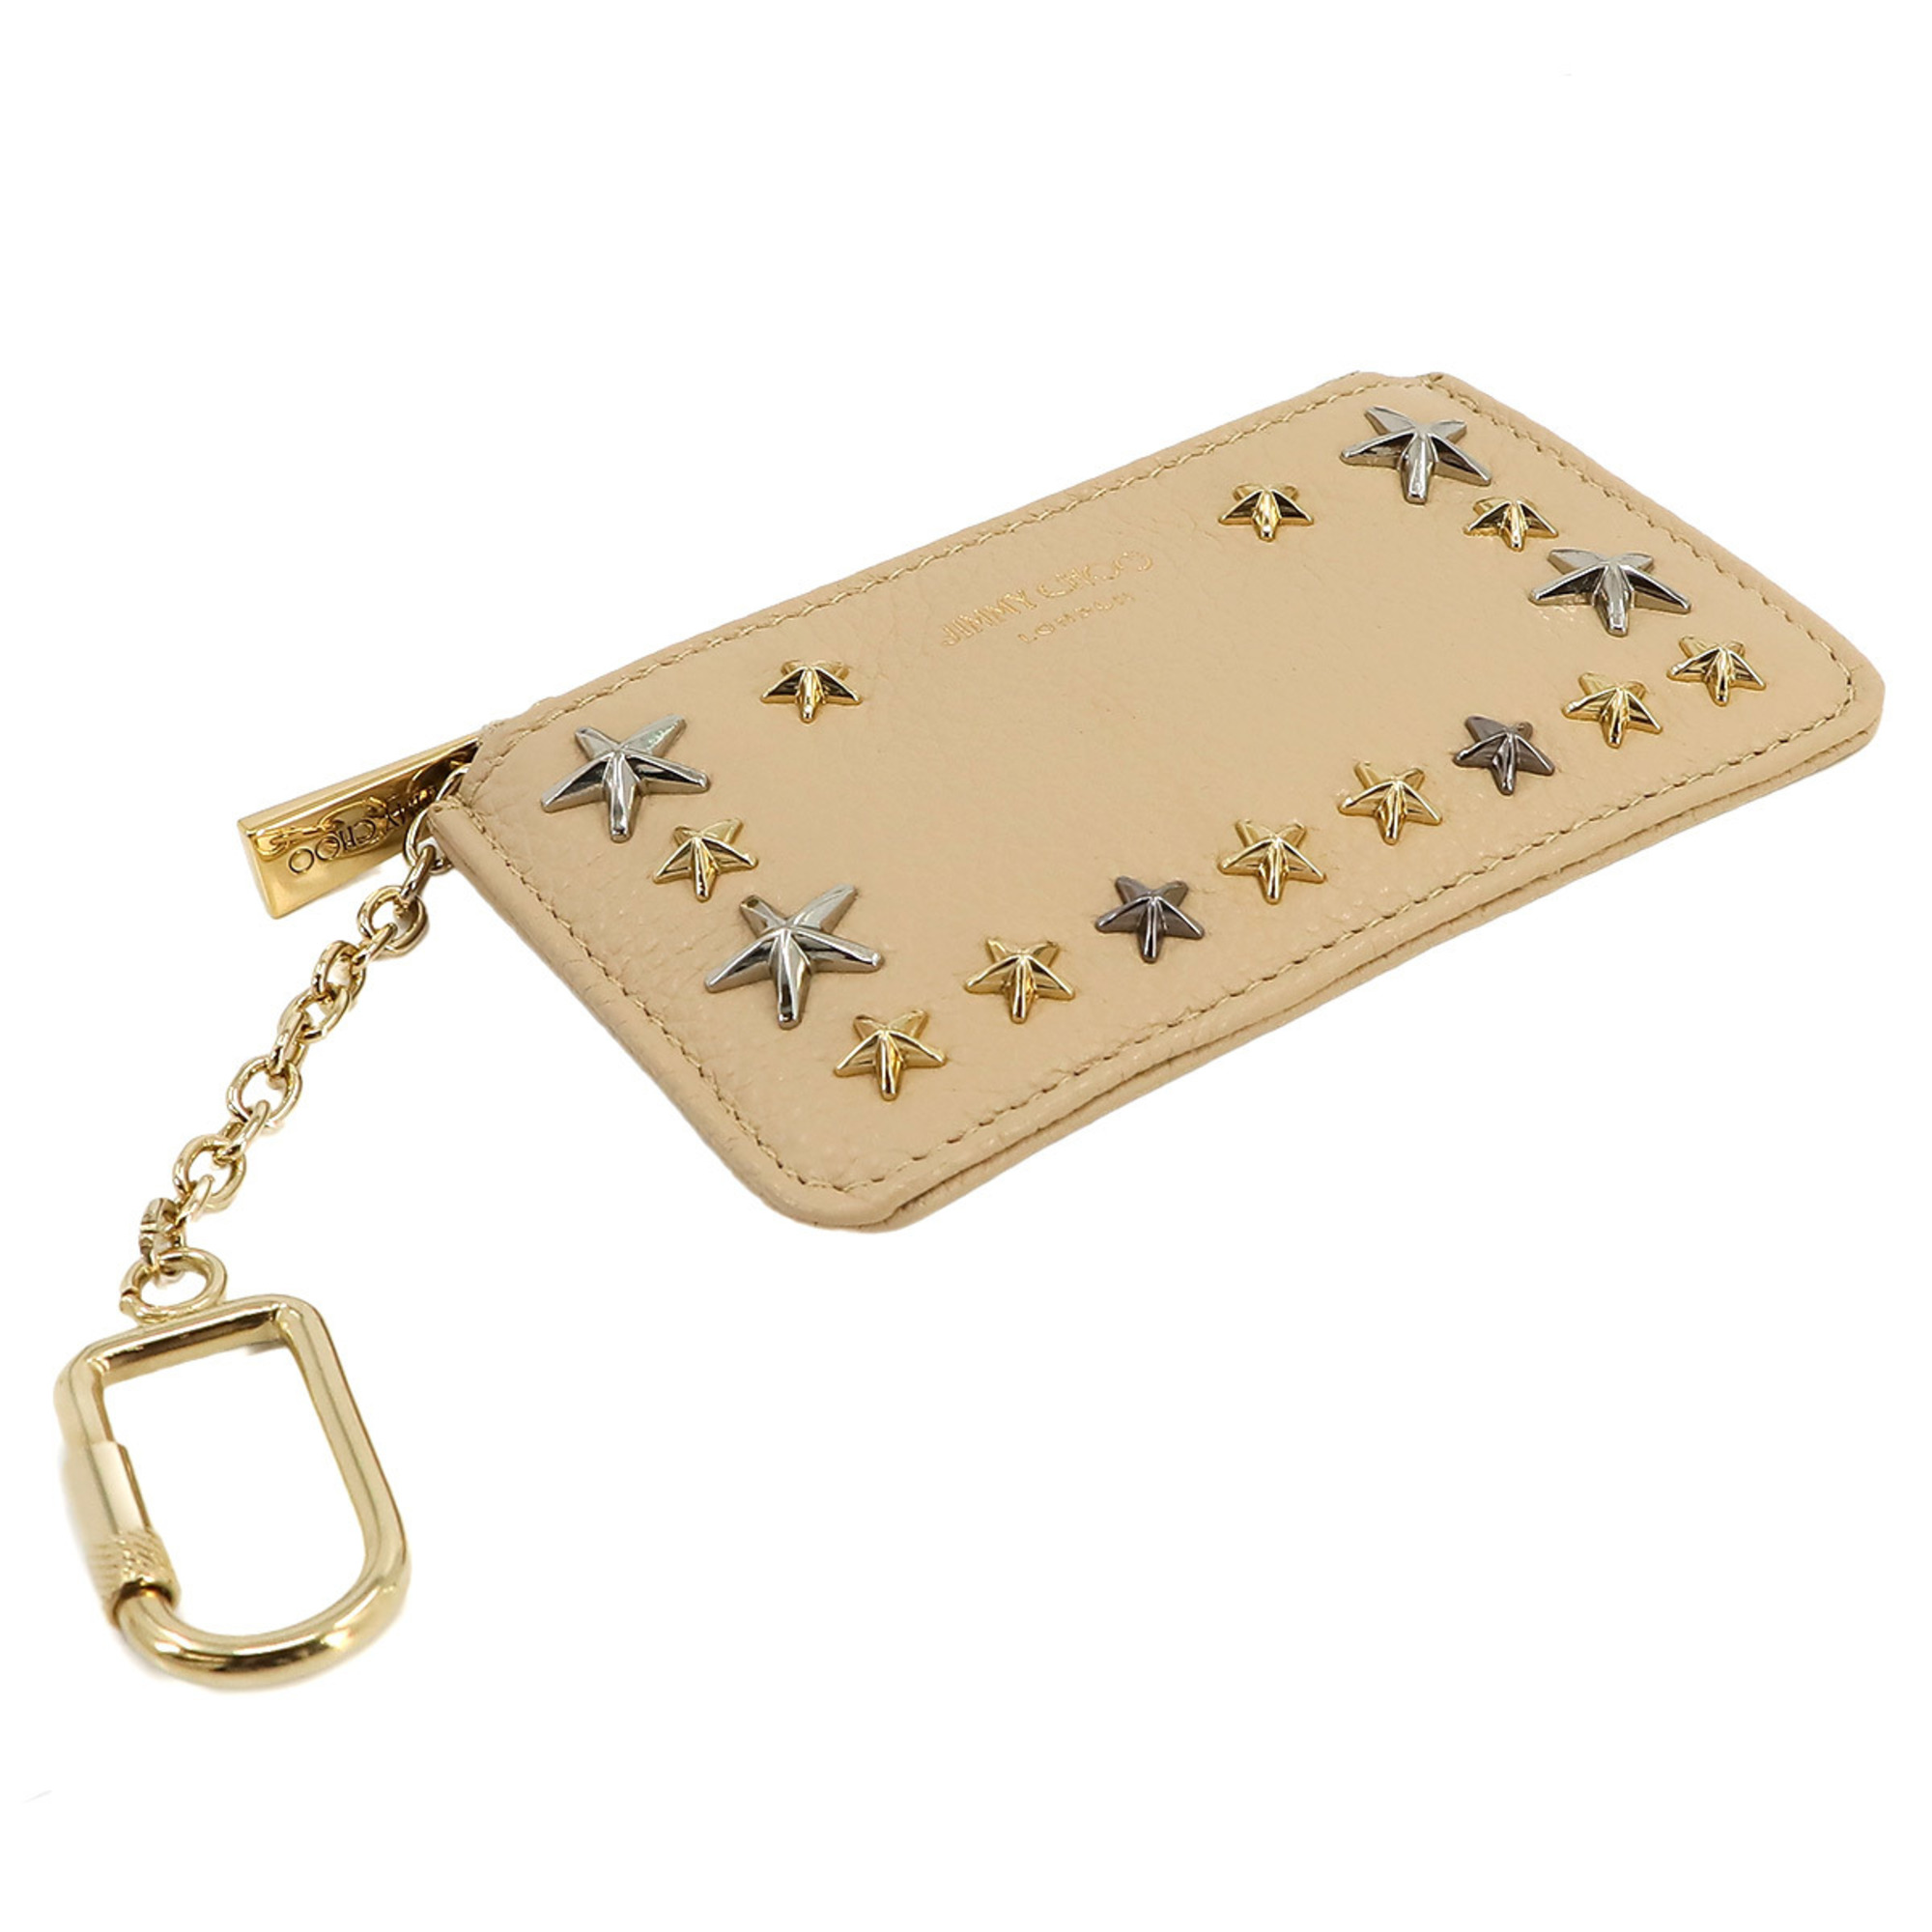 JIMMY CHOO Star Studs Wallet/Coin Case Coin Purse Leather Beige 121696